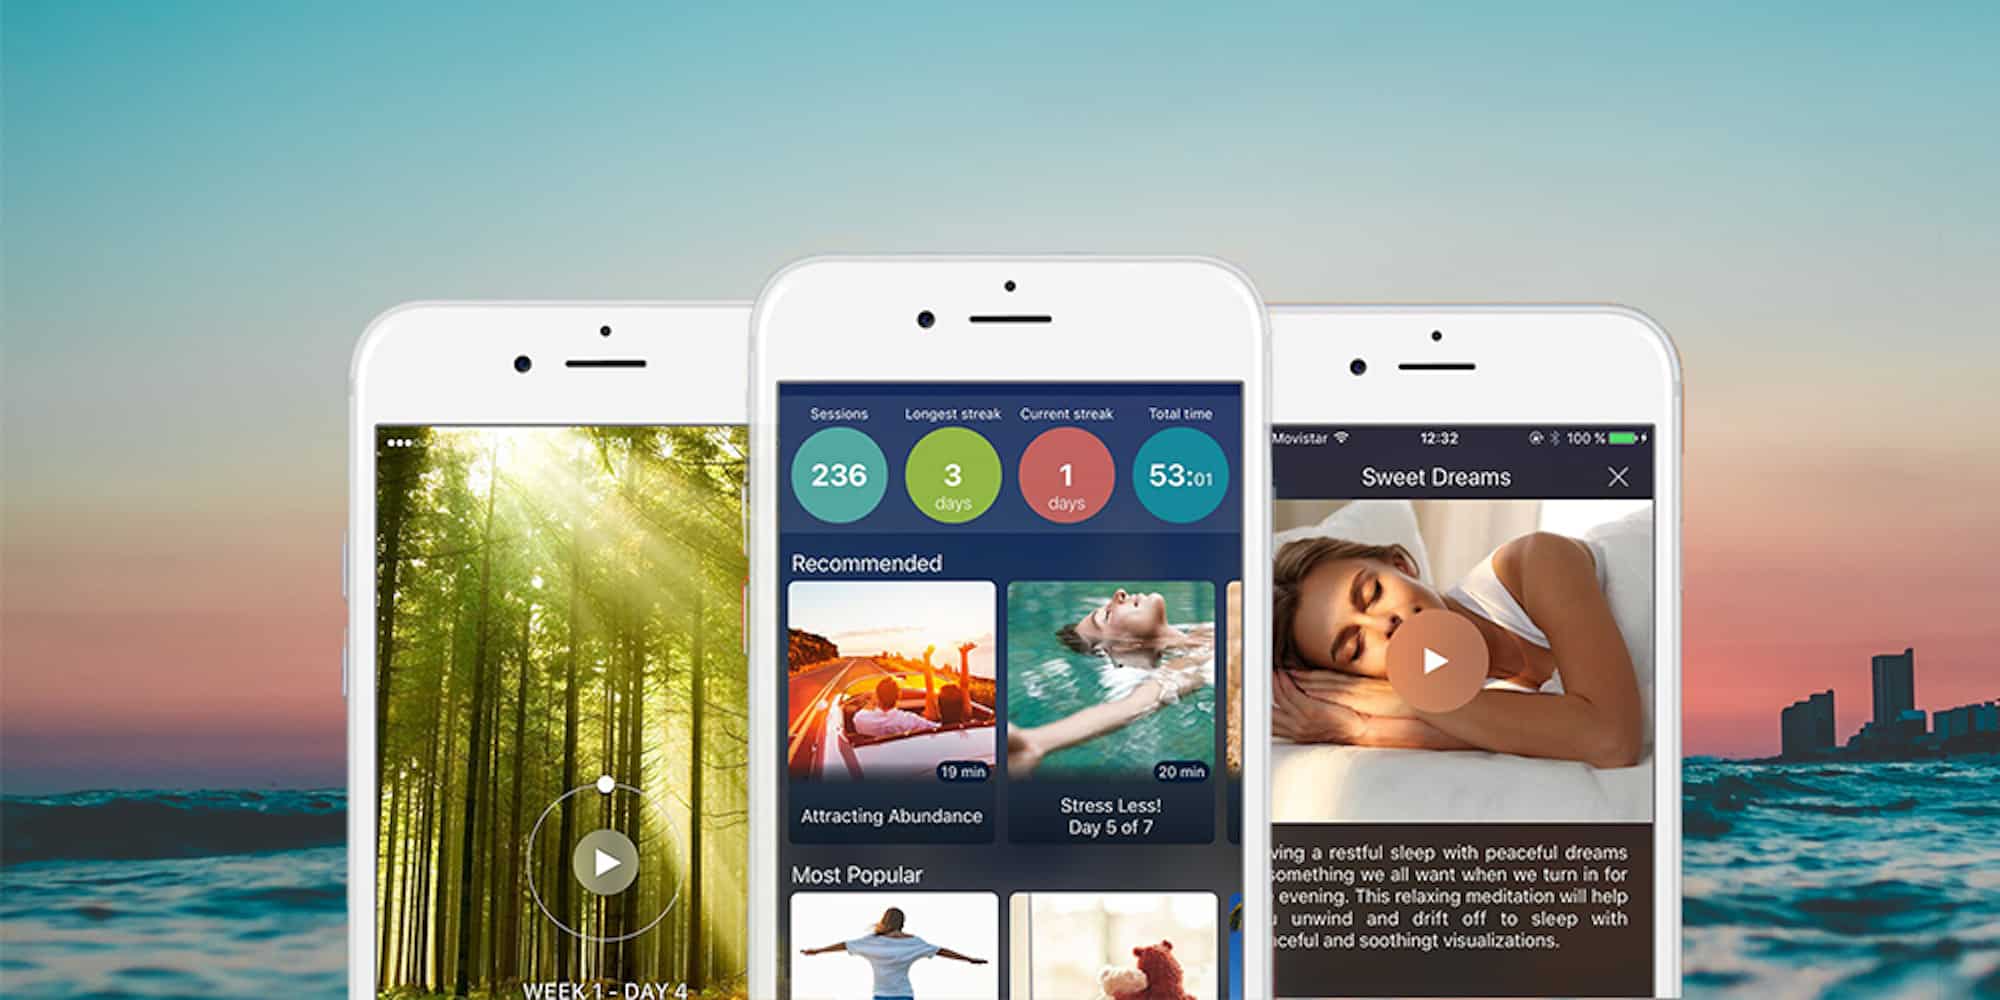 Start guided meditations today with Breethe, a highly rated app.